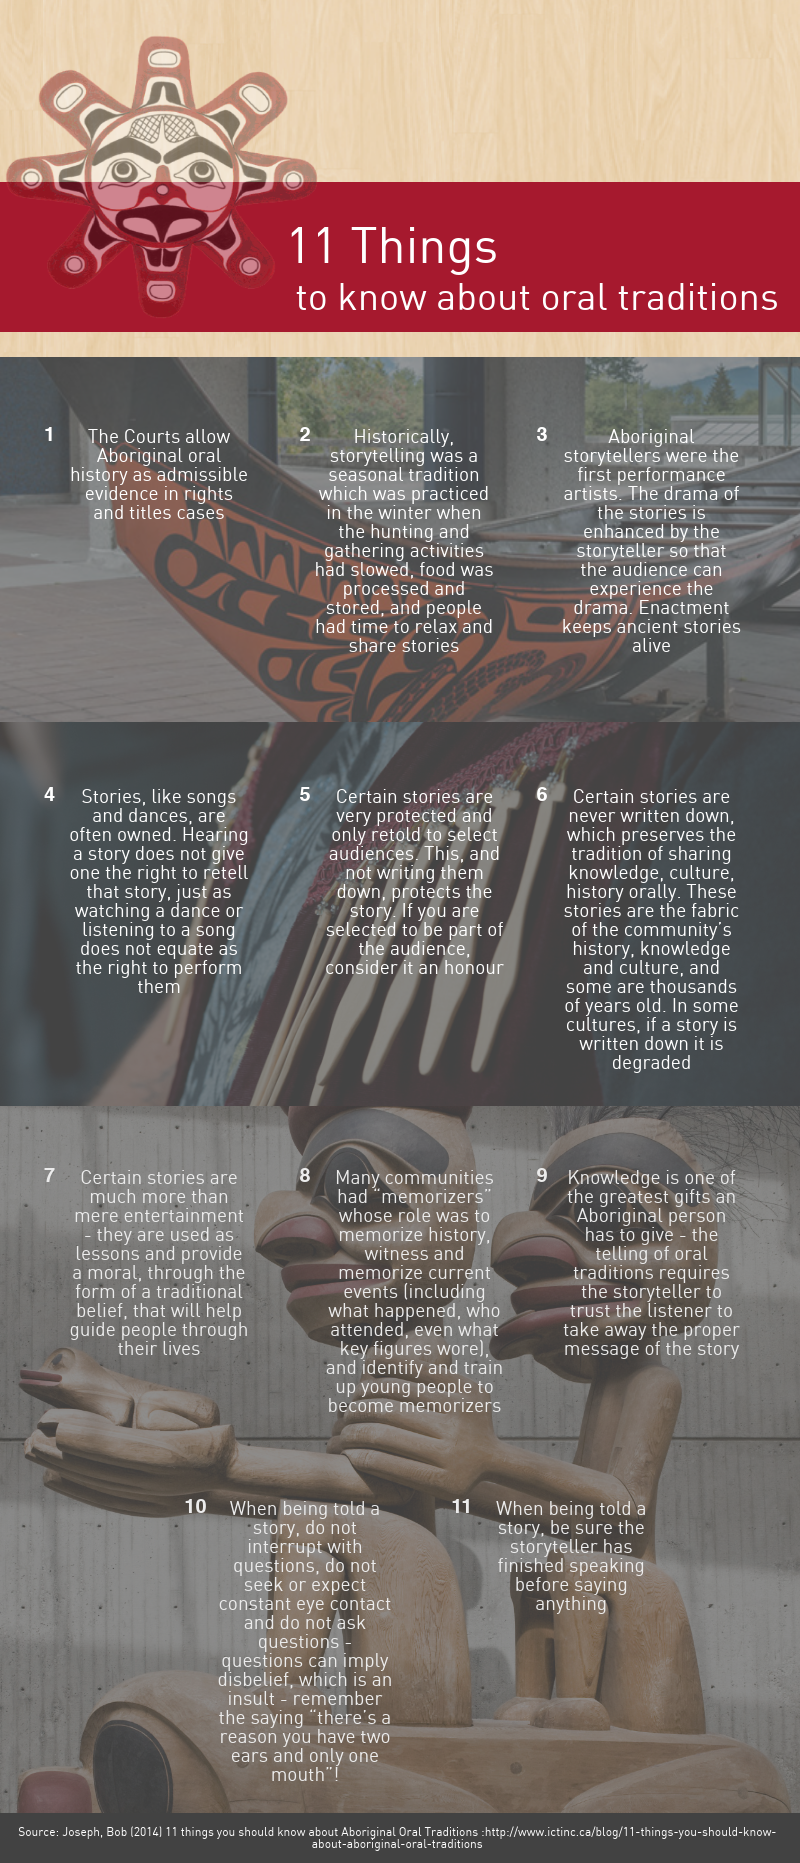 11 Things to Know About Oral Traditions